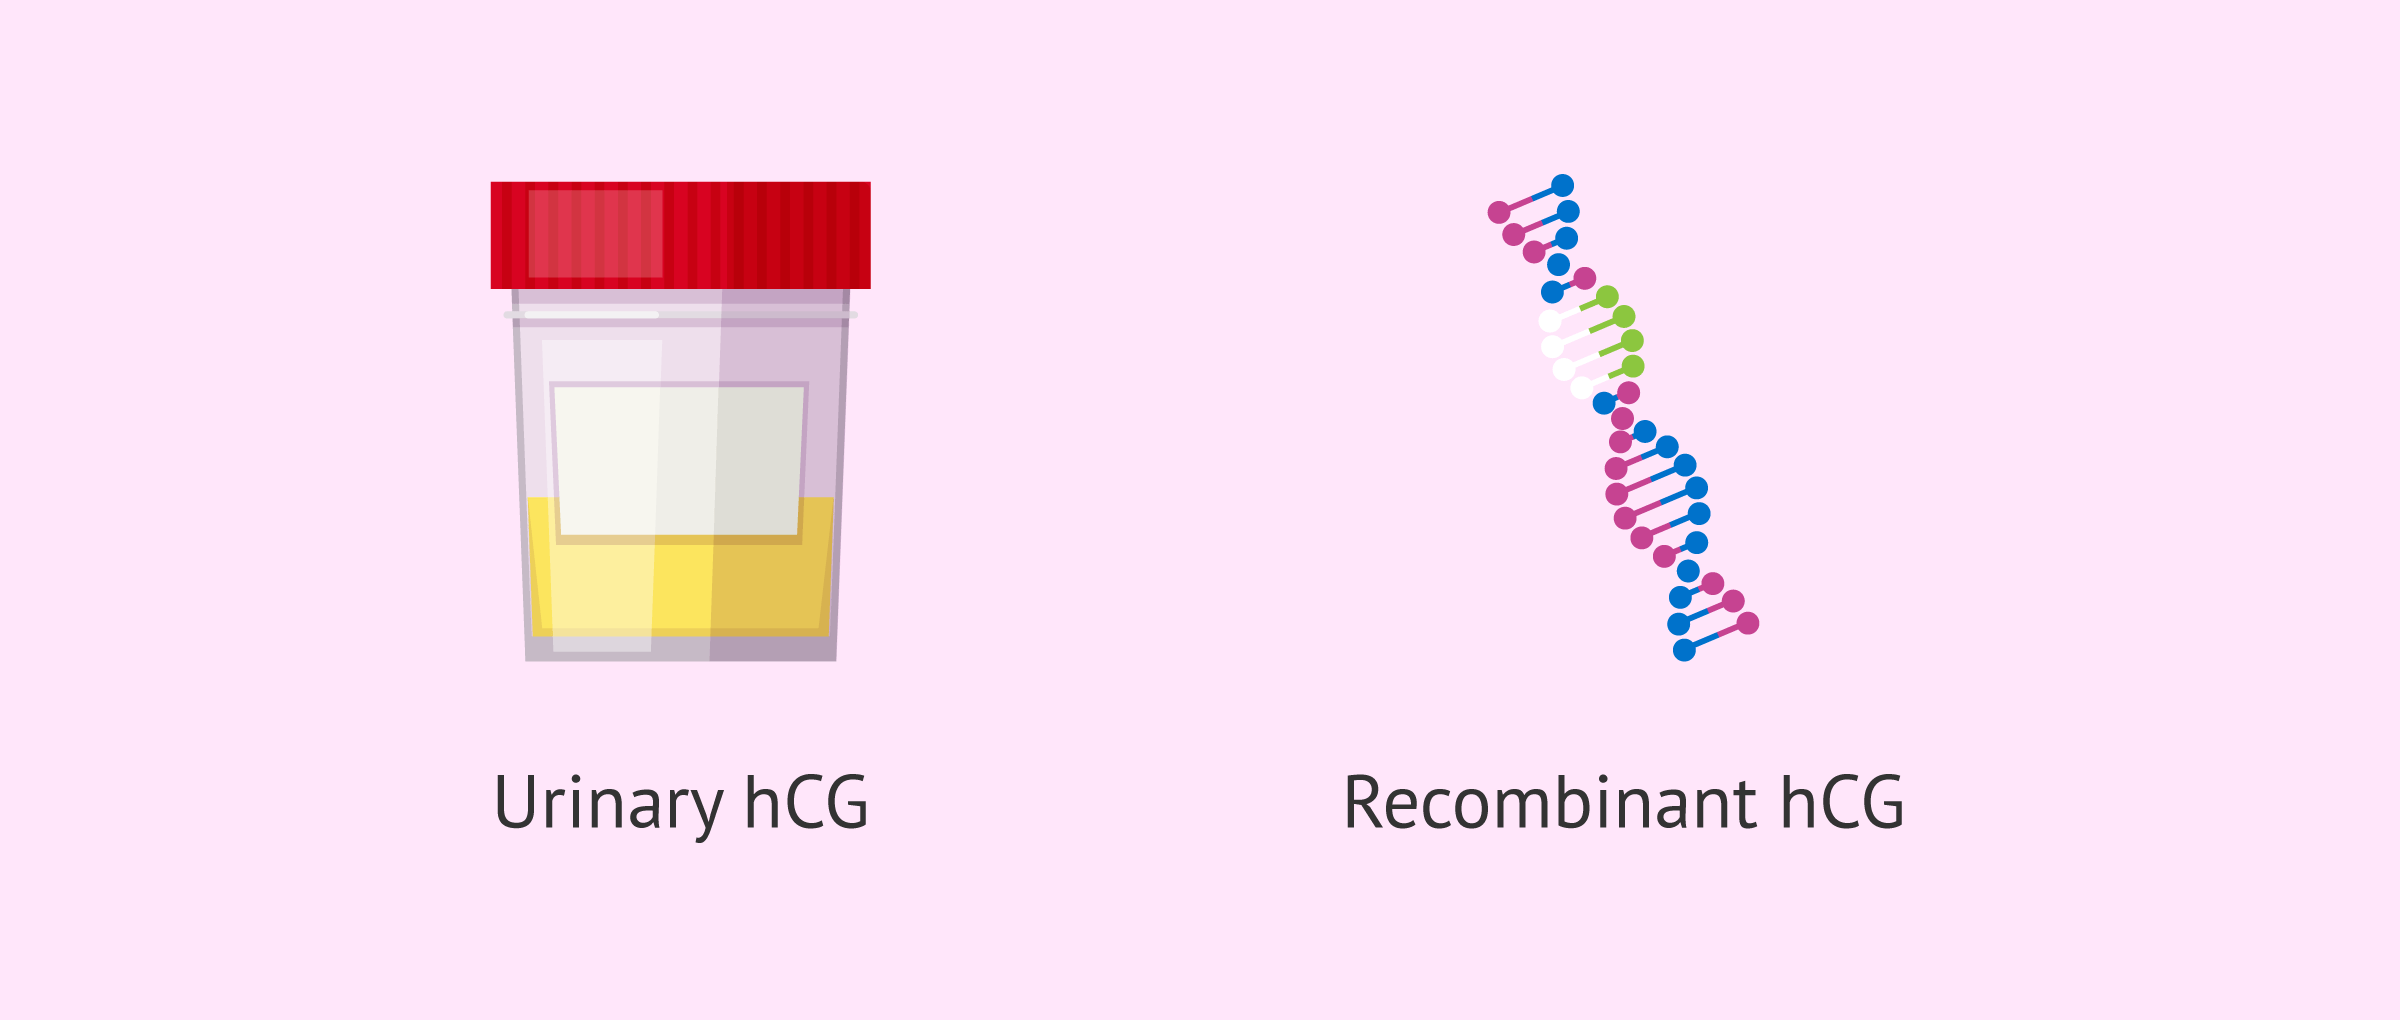 Types of hCG according to how it was obtained